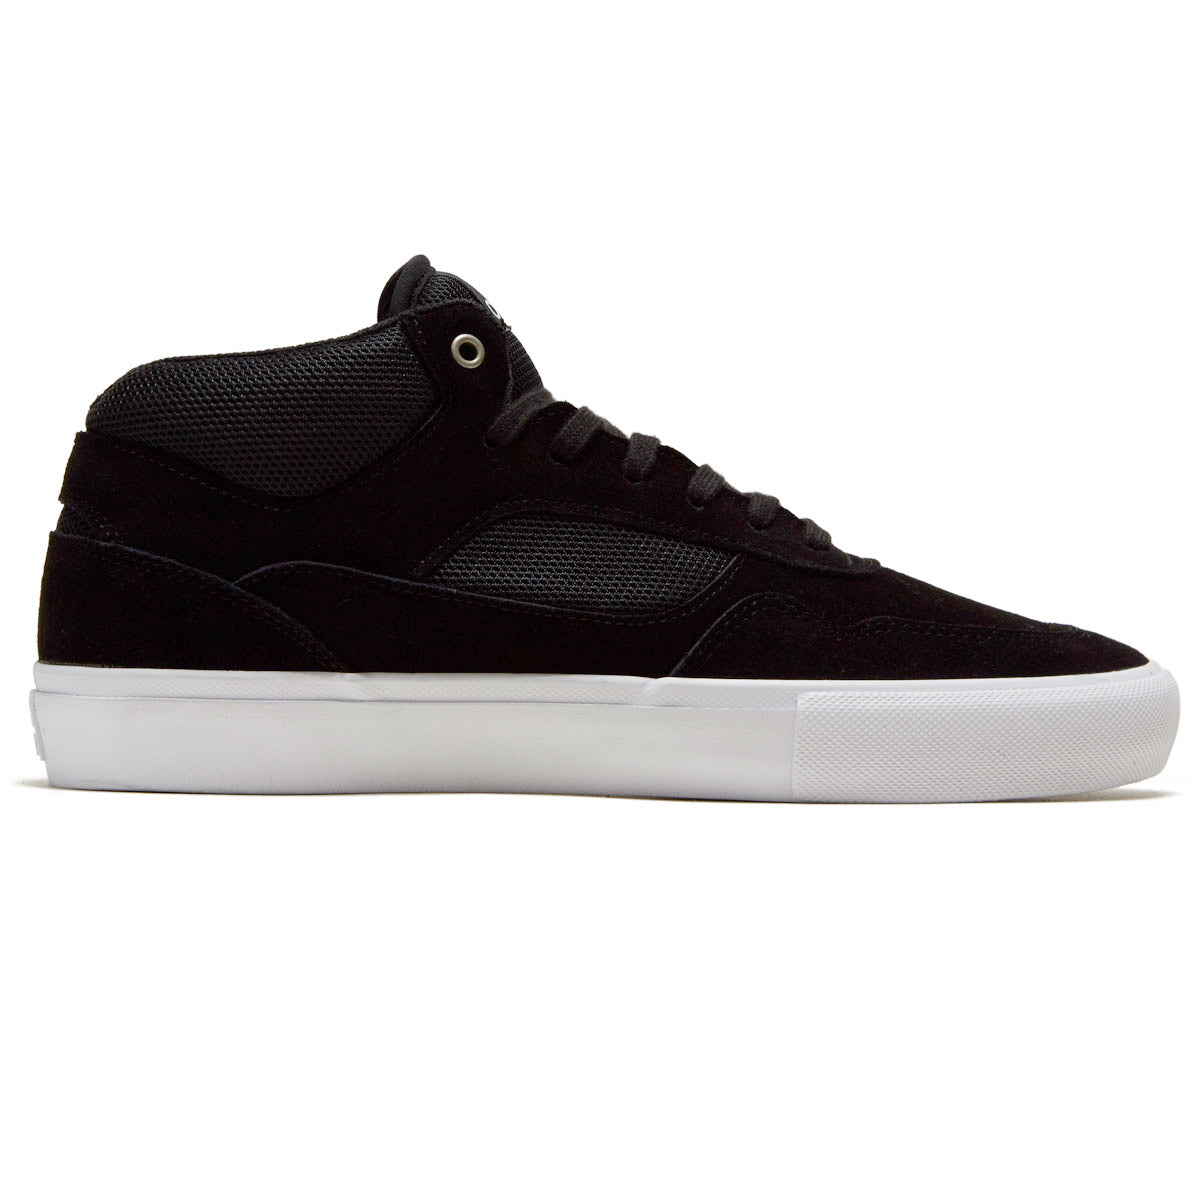 Opus Standard Mid Shoes - Black/White image 1